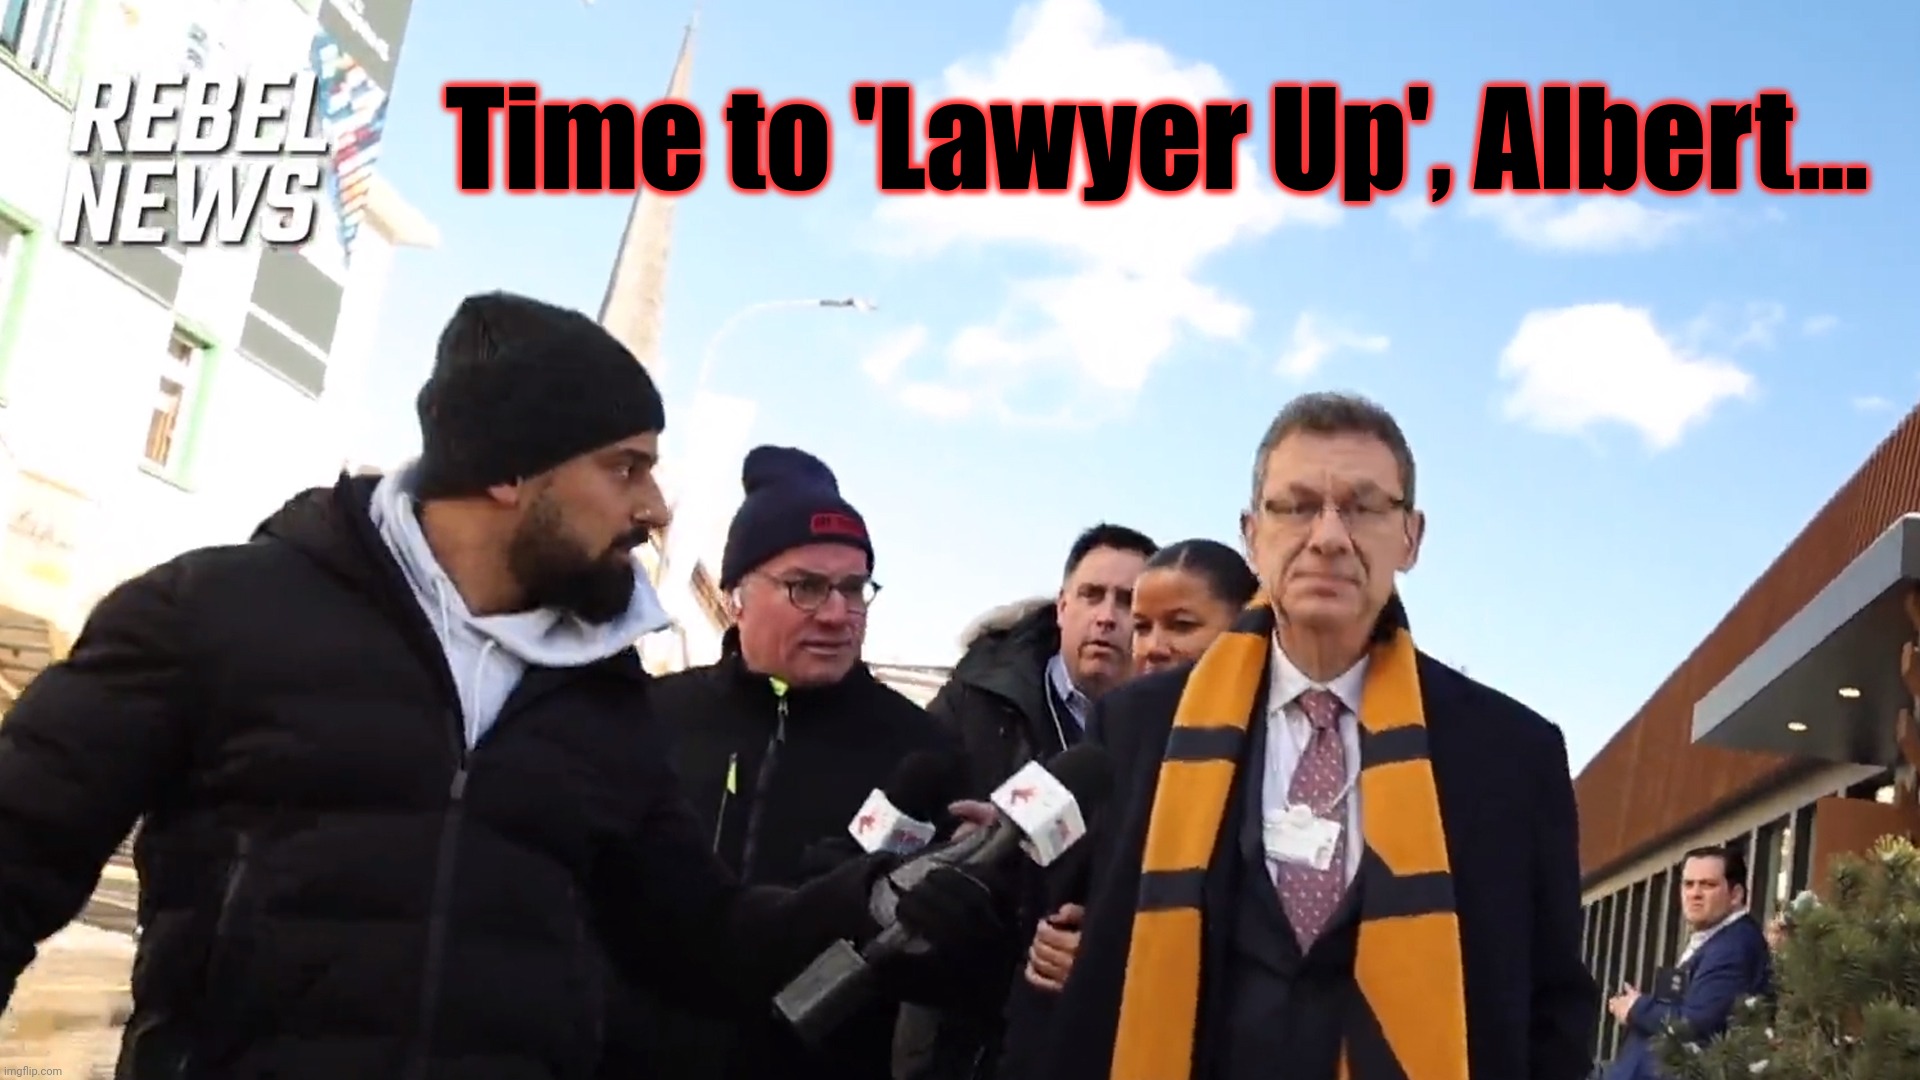 Time to 'Lawyer Up', Albert... | made w/ Imgflip meme maker